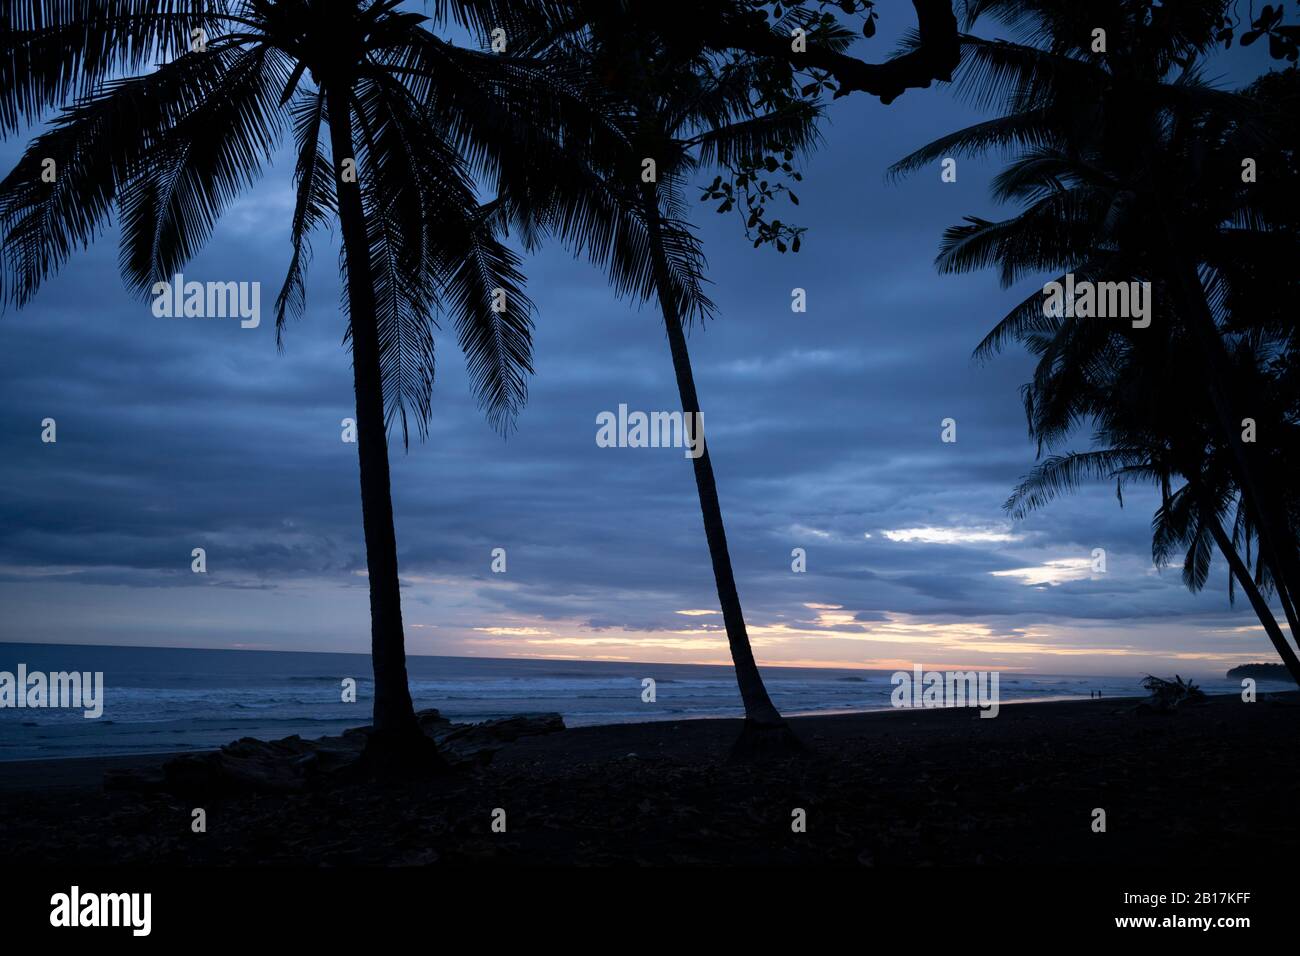 Costa Rica, Guanacaste Province, Silhouettes of palm trees growing on coastal beach at dusk Stock Photo